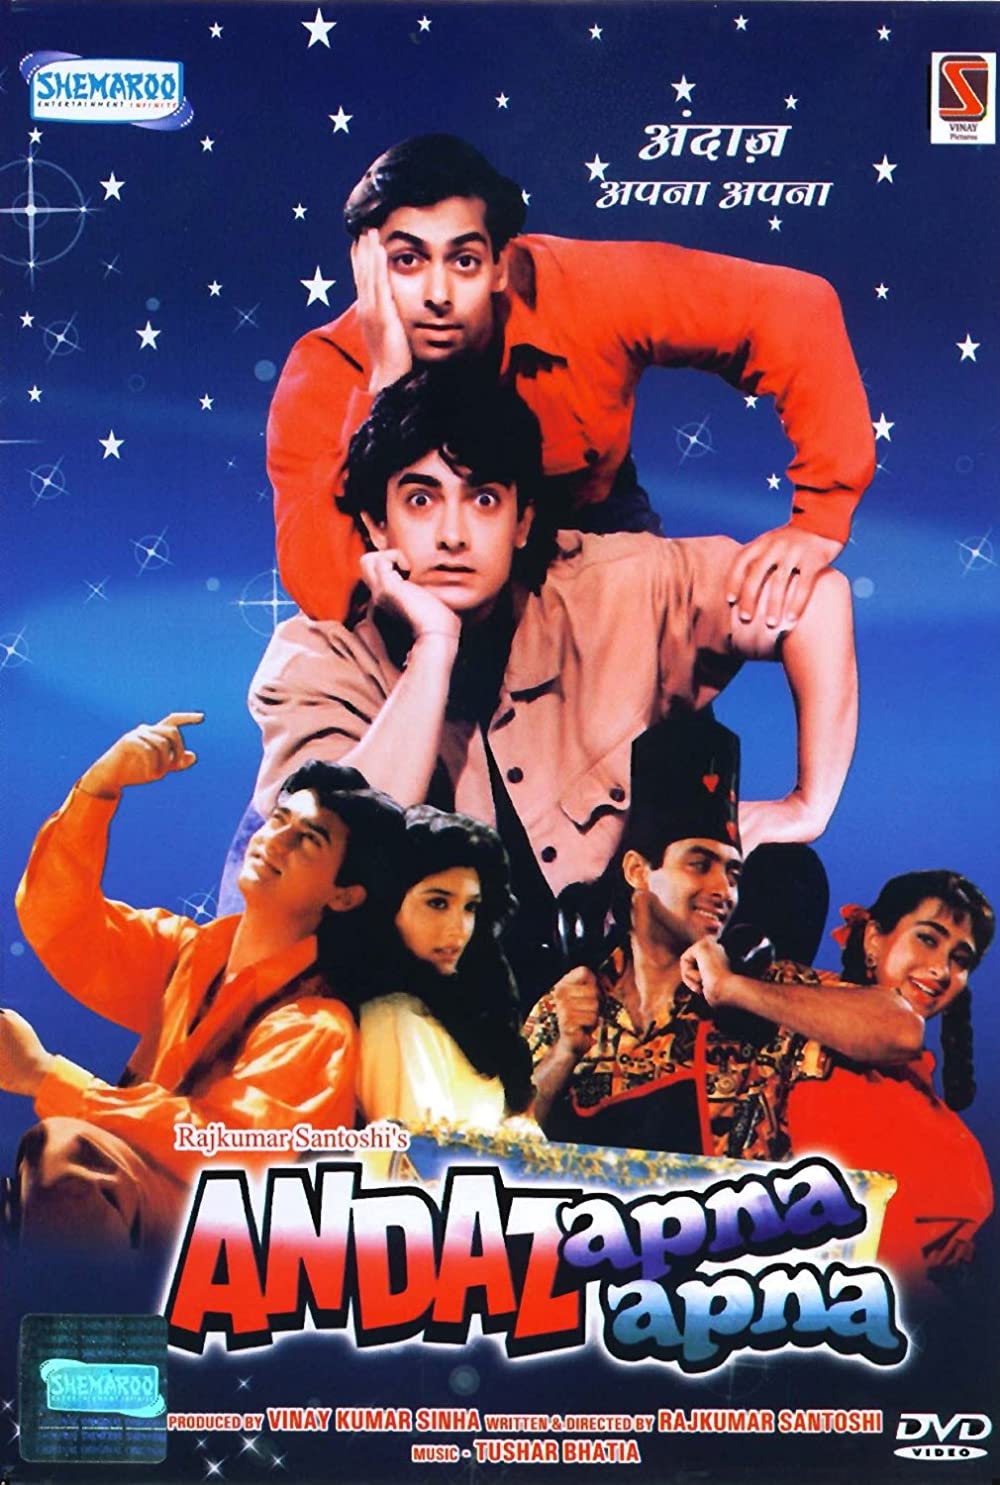 10 Top-Rated Bollywood Comedy Movies According to IMDb